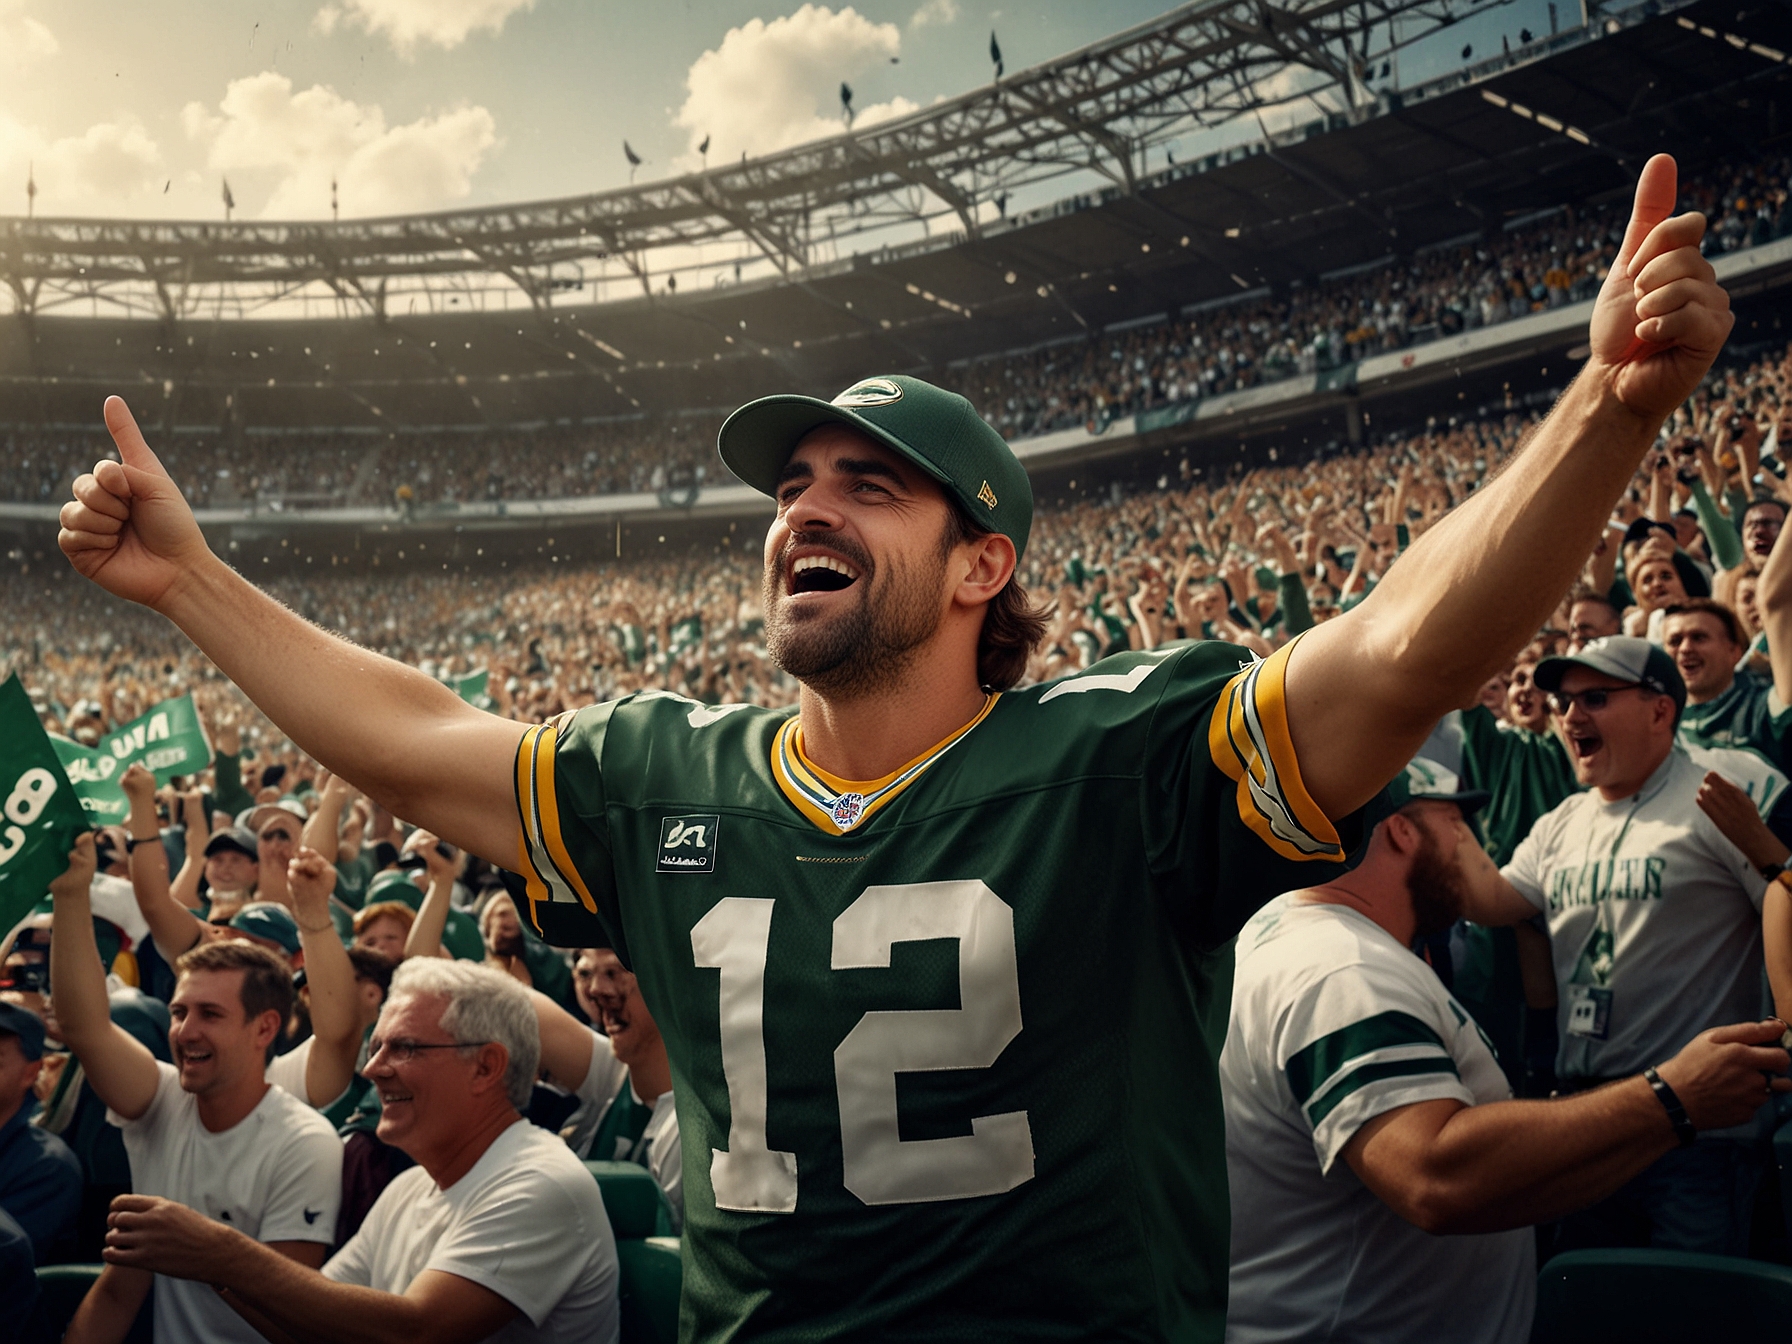 Jets fans in the stadium cheering energetically, reflecting the renewed sense of hope and excitement sparked by Aaron Rodgers's presence on the team.